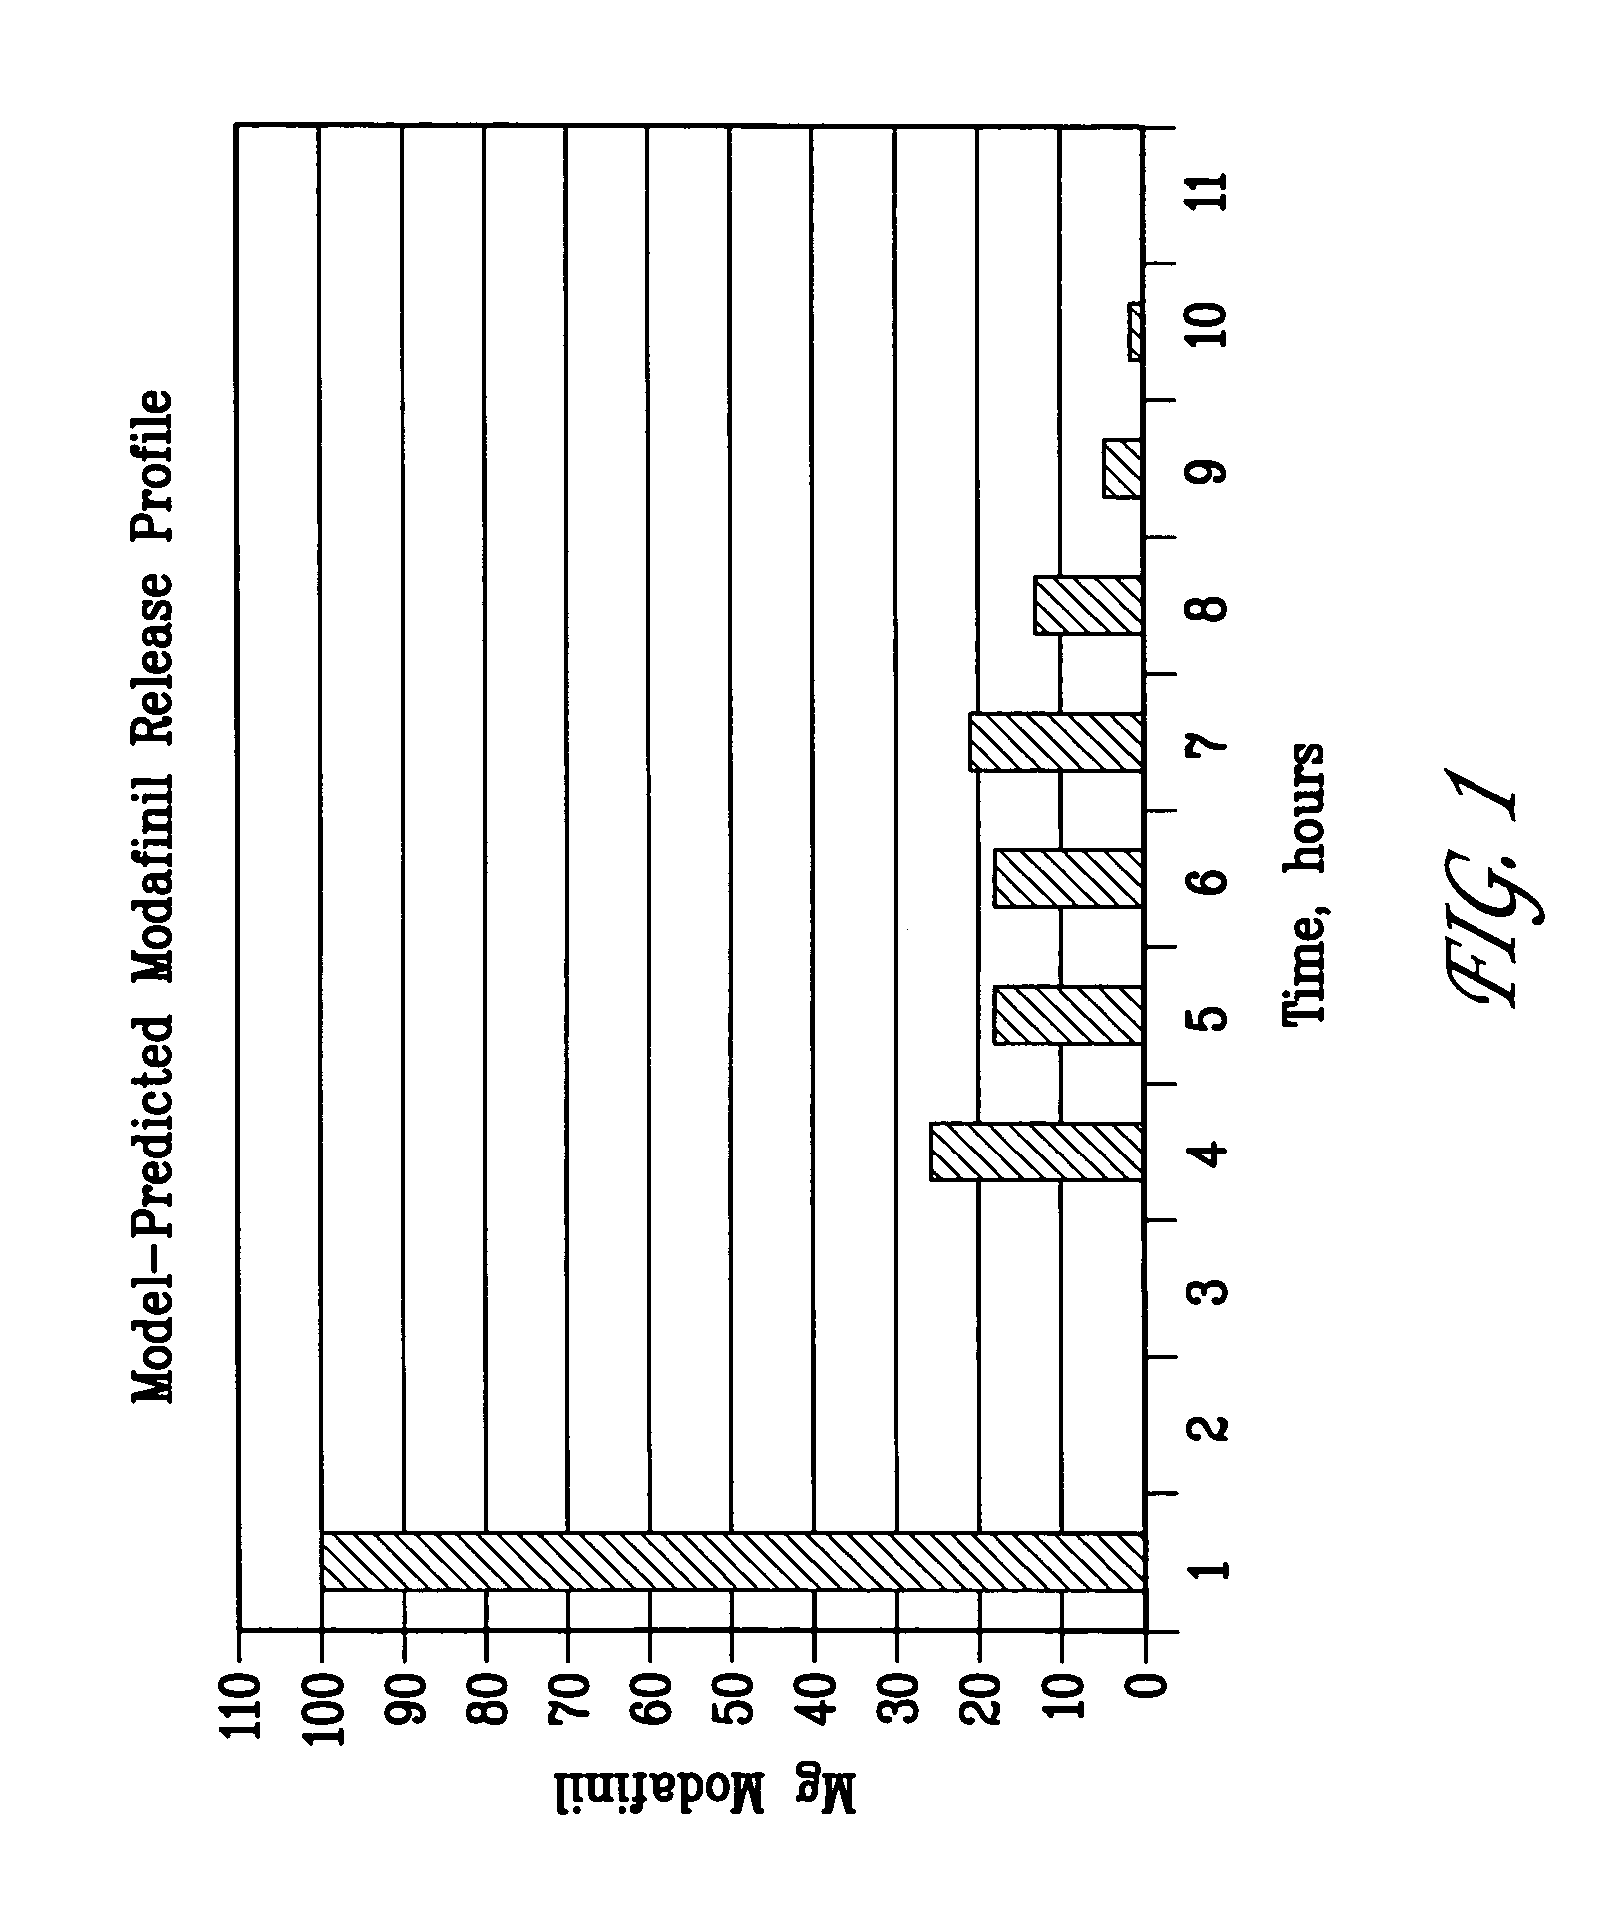 Modafinil modified release pharmaceutical compositions